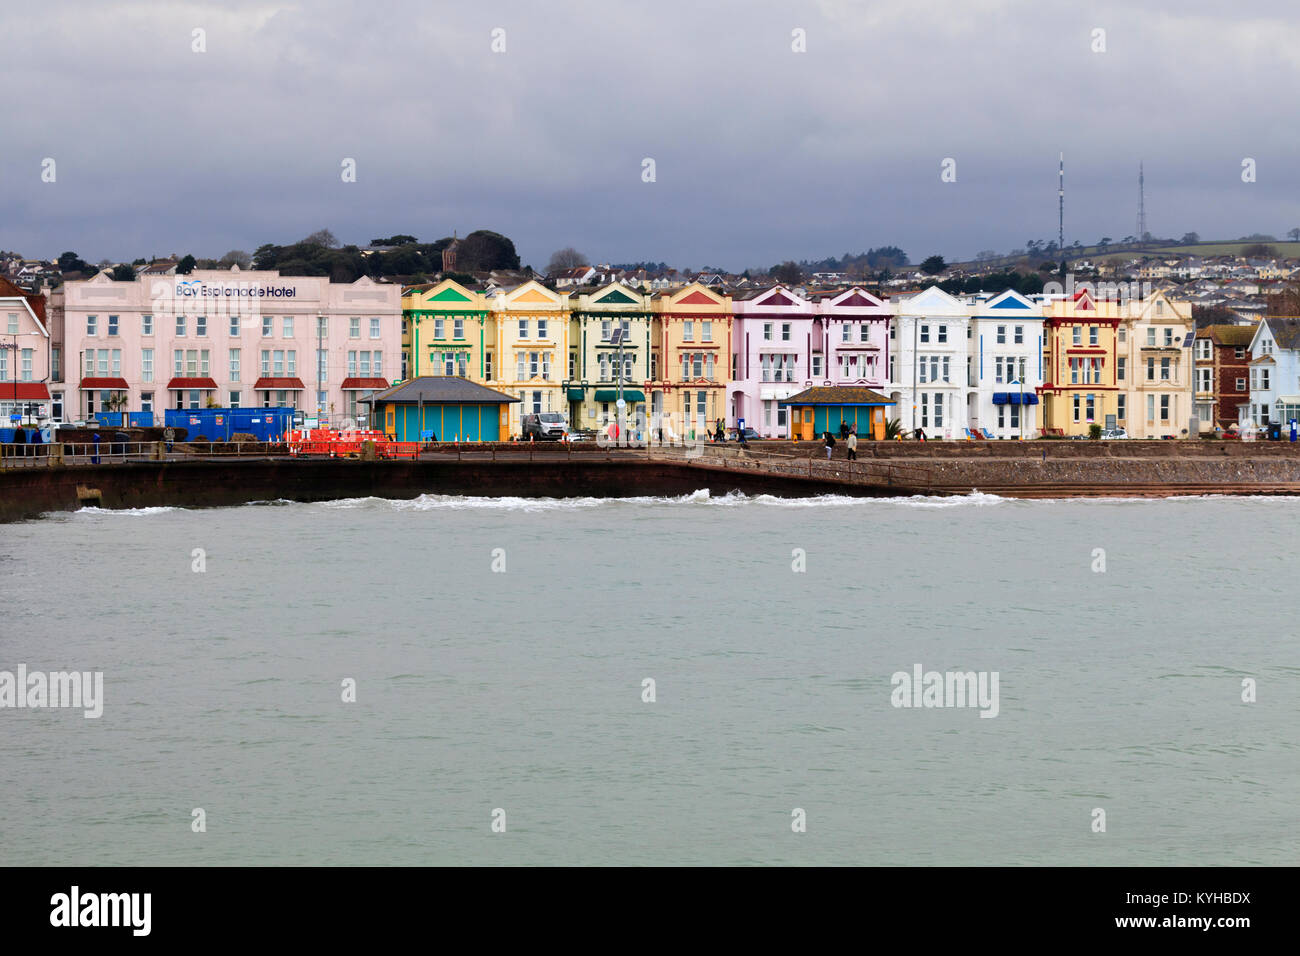 Colourful facades of Victorian buildings housing hotels brighten a grey January day on the Esplanade at Paignton, Devon, UK Stock Photo